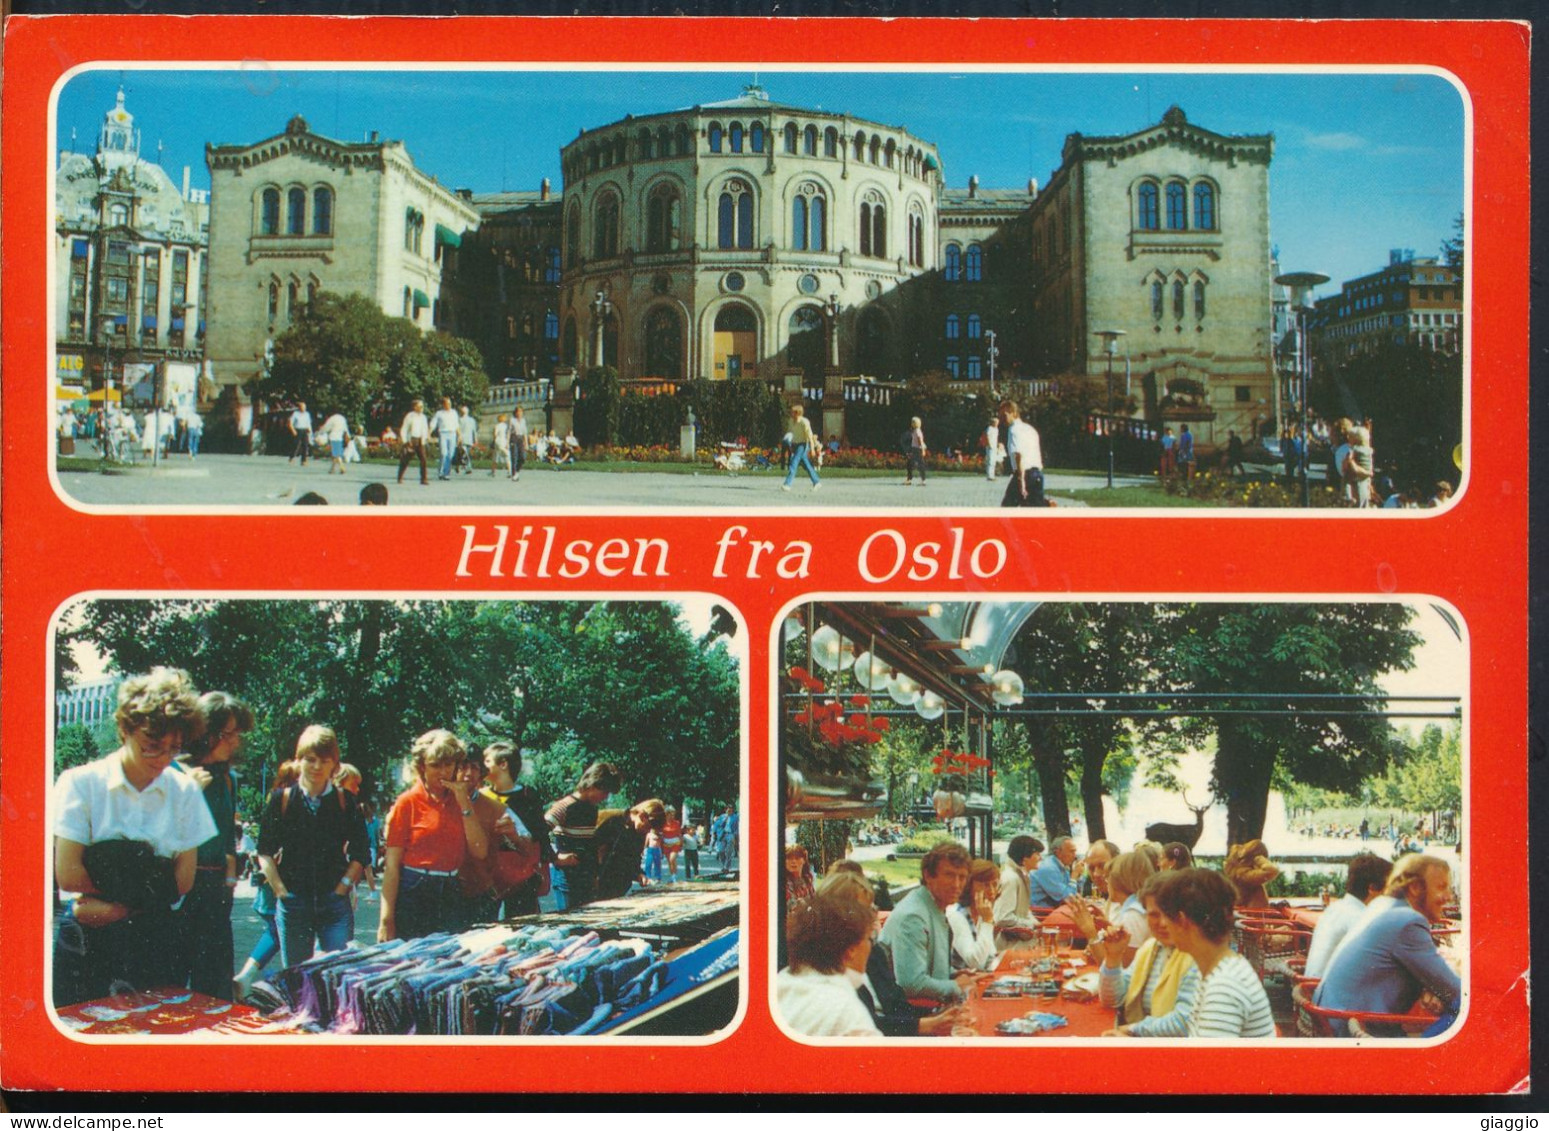 °°° 31010 - NORWAY - HILSEN FRA OSLO - 1982 With Stamps °°° - Norvège